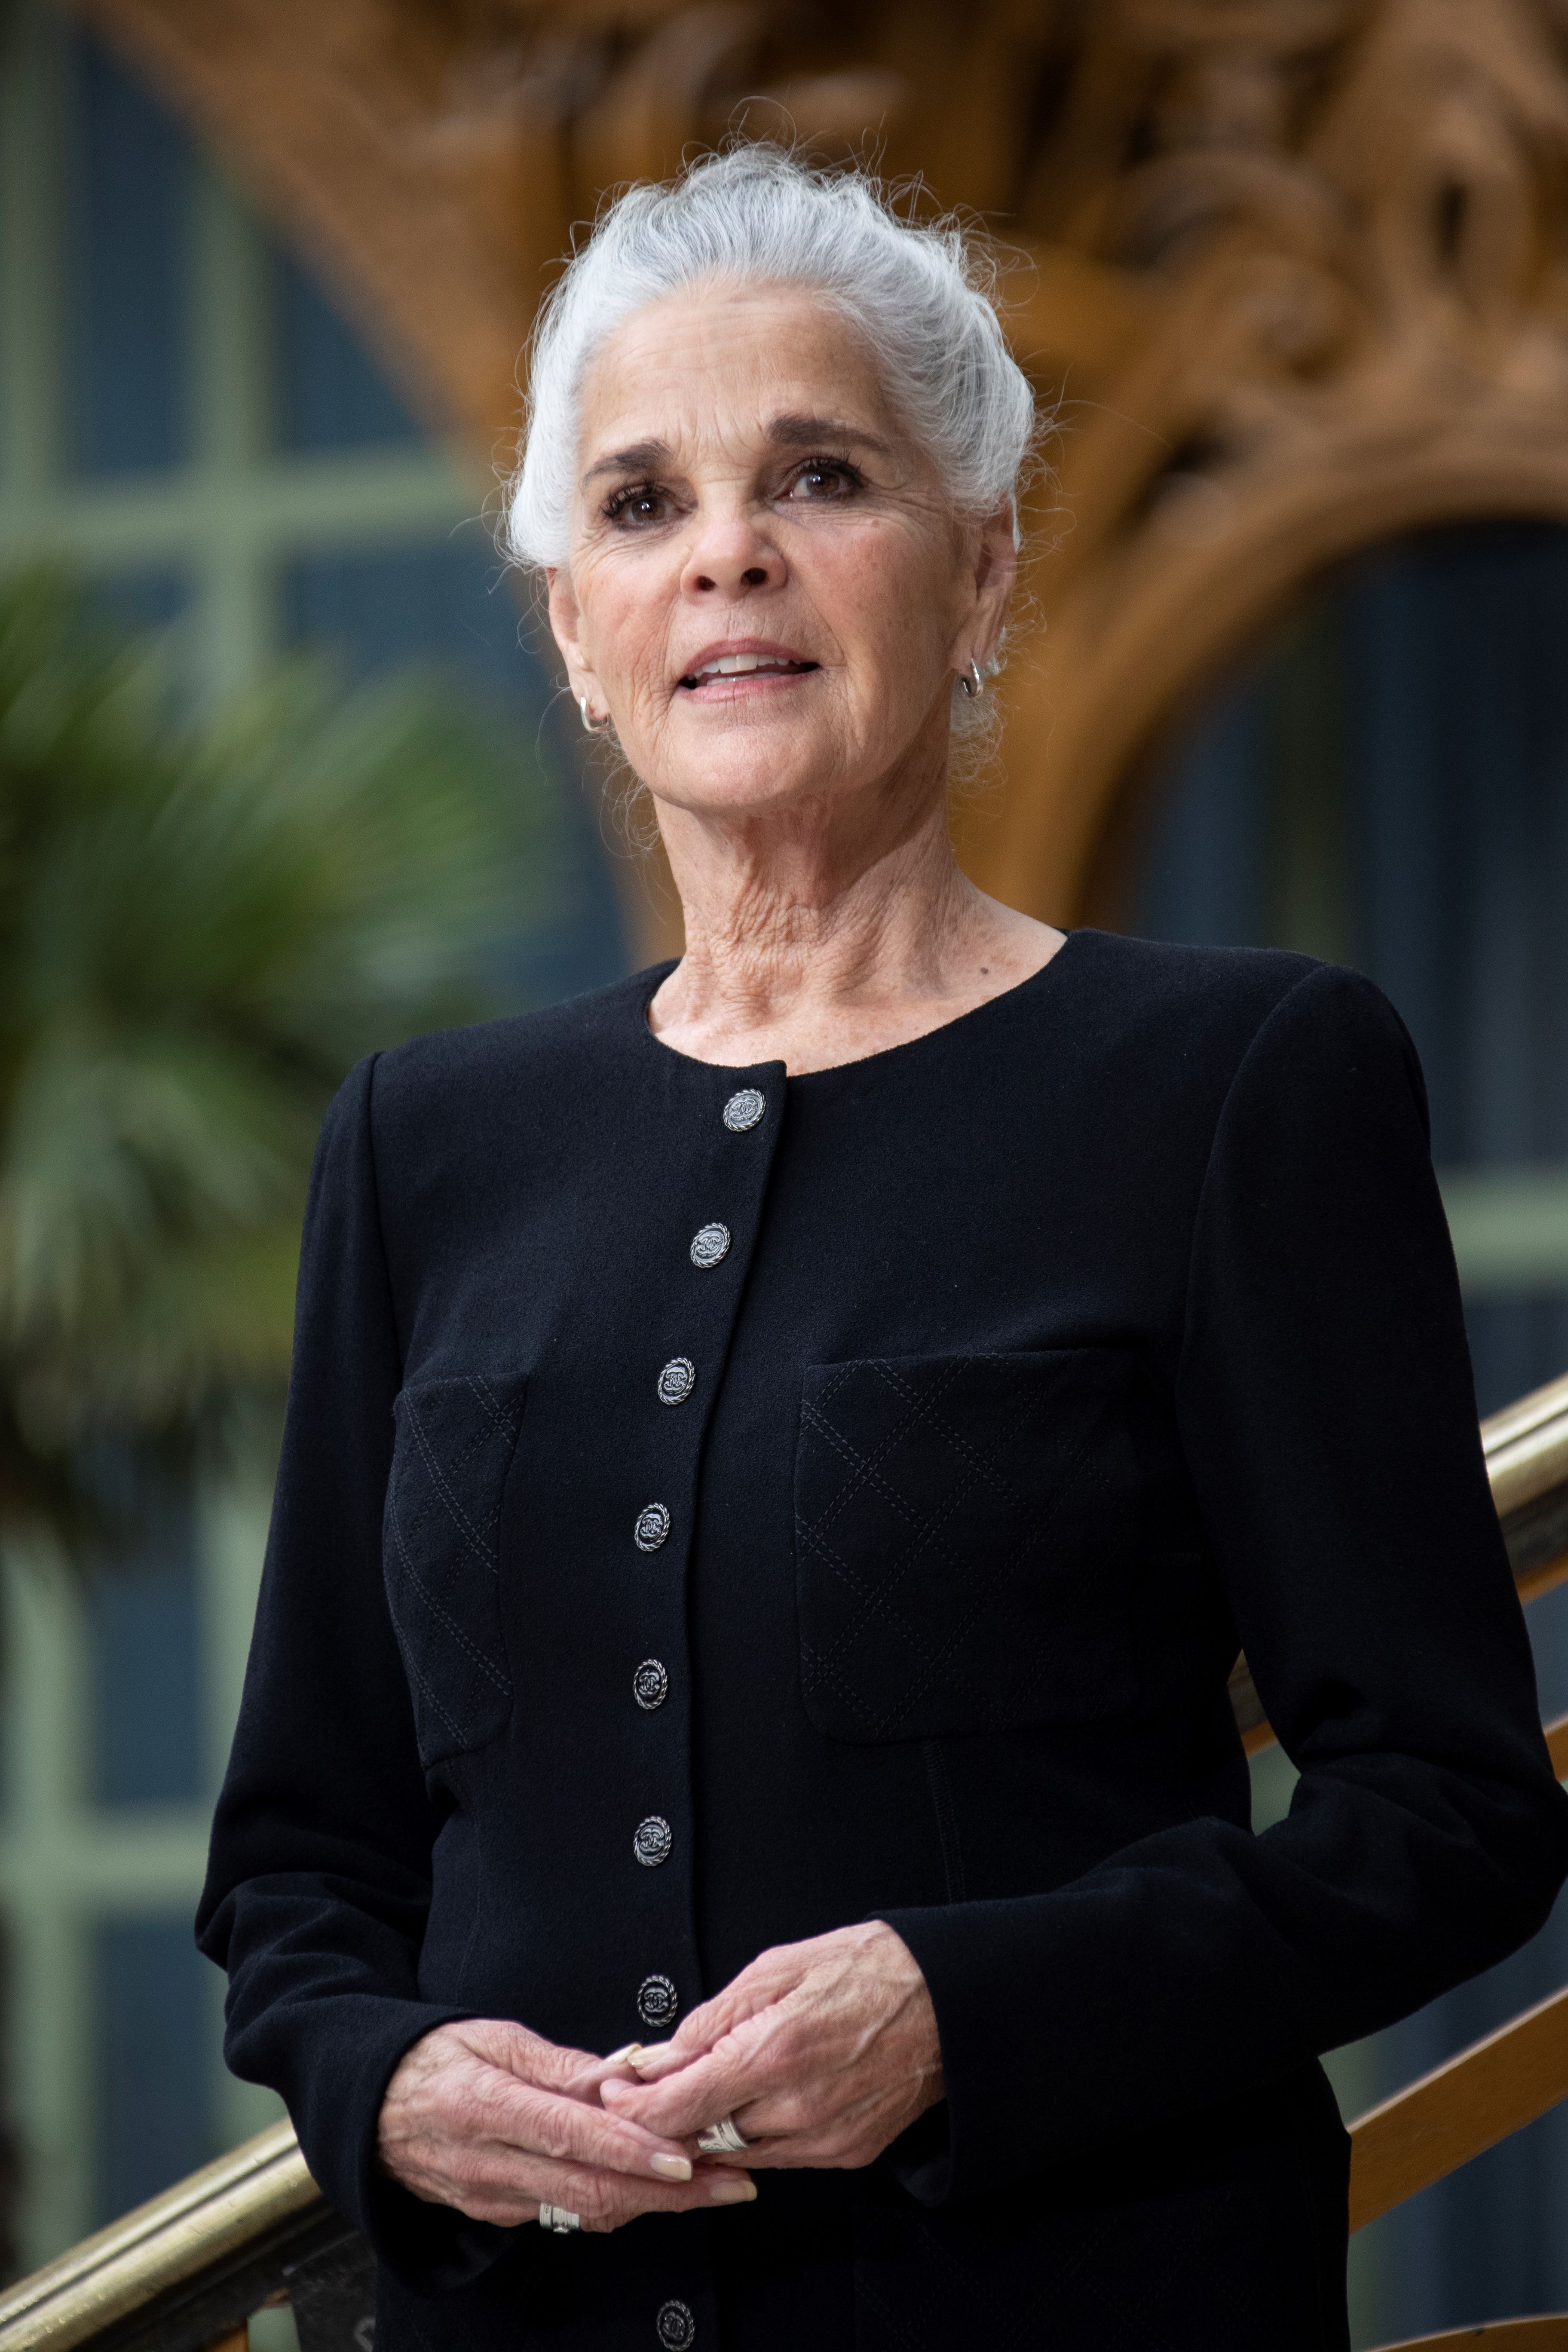 Ali MacGraw at the 2020 Chanel Croisiere (Cruise) fashion show at the Grand Palais in Paris | Source: Getty Images